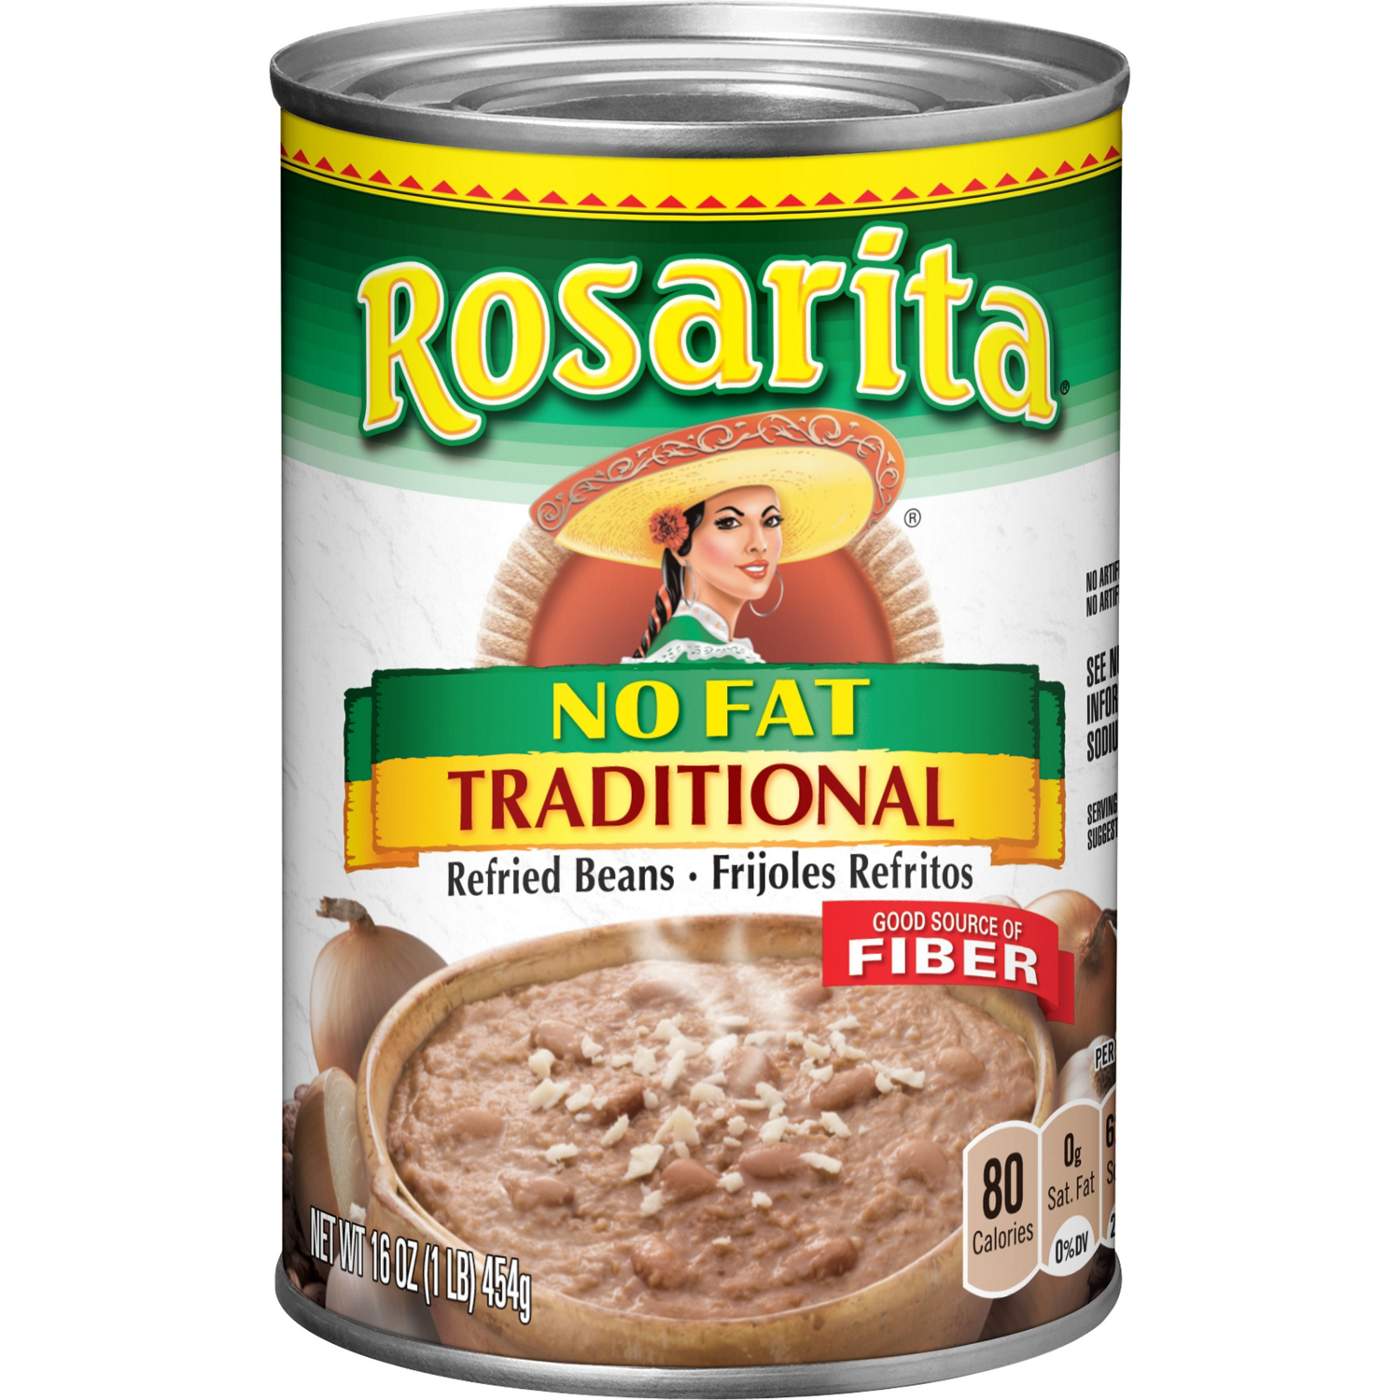 Rosarita No Fat Traditional Refried Beans; image 1 of 5